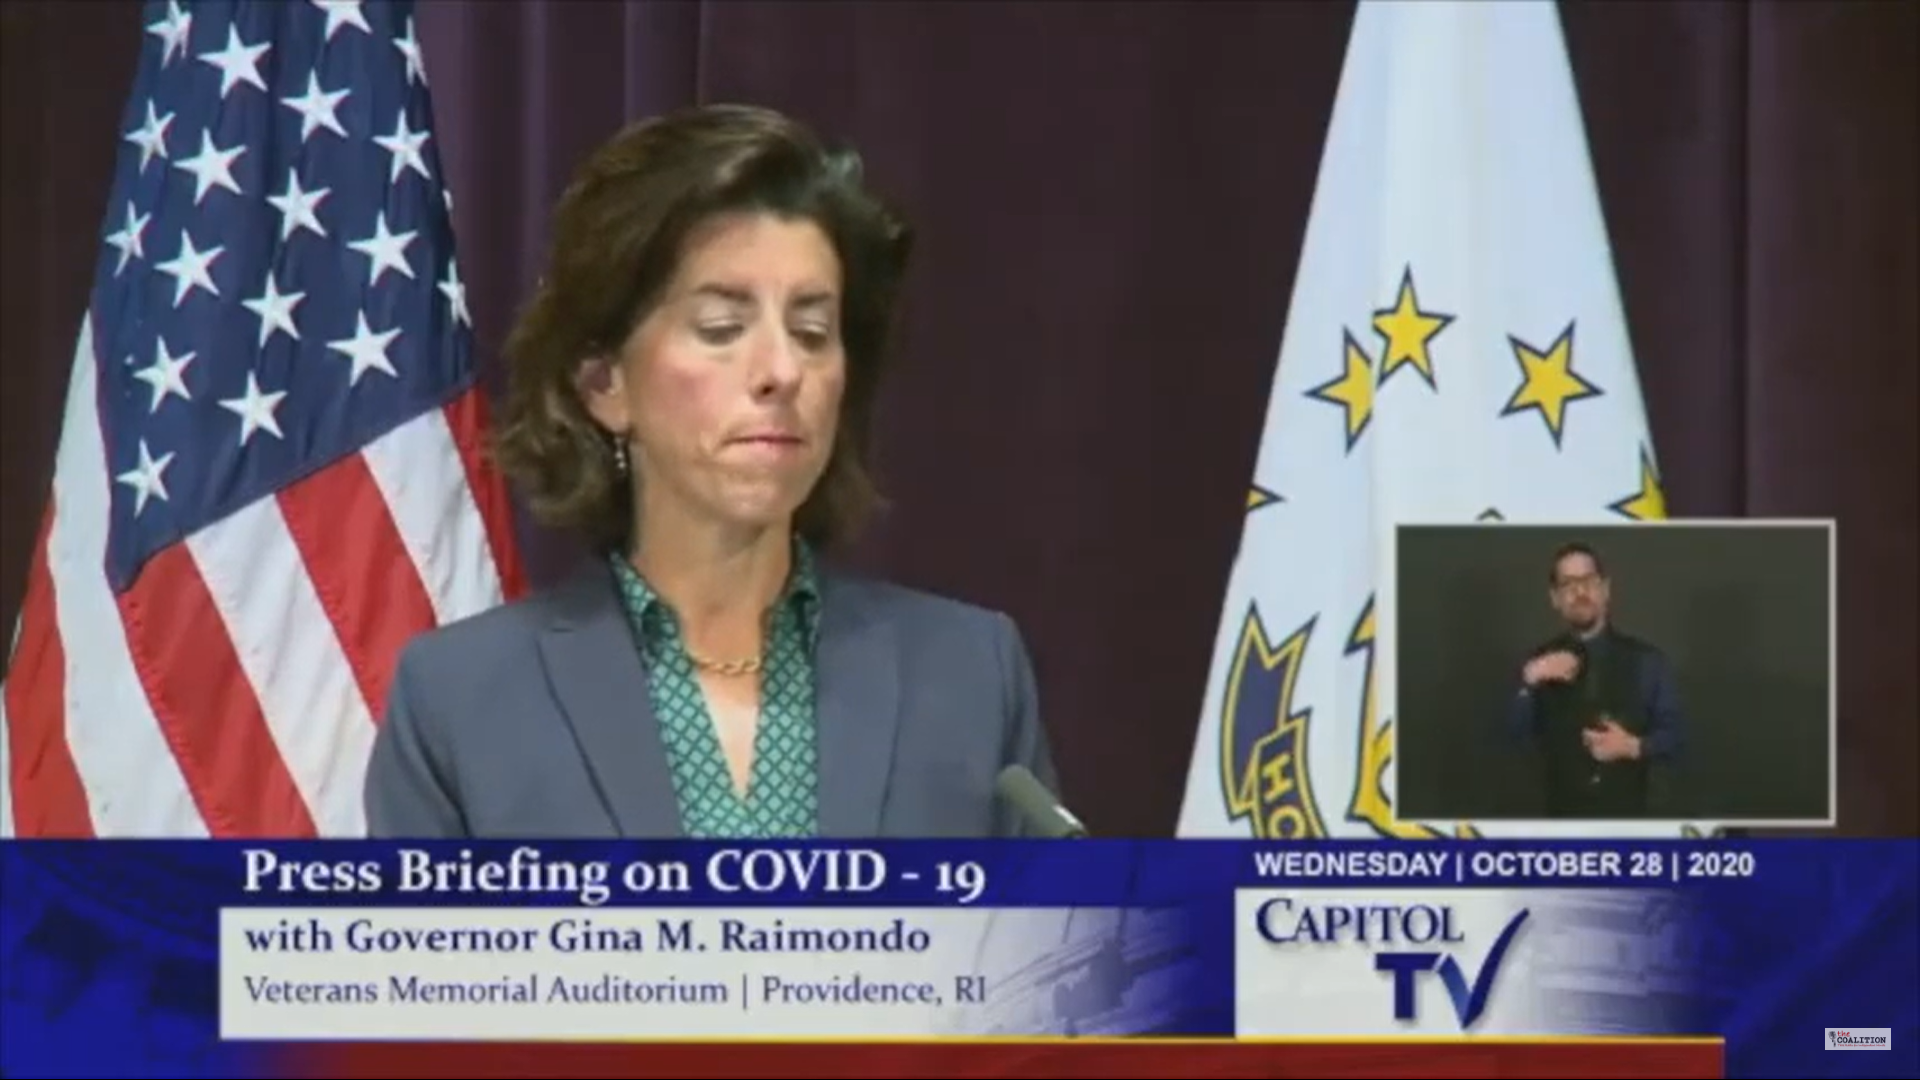 Raimondo admits [her negligence] will lead to massive government employee layoffs: “After the stimulus (stumbling) there will absolutely be furloughs and layoffs and cuts”